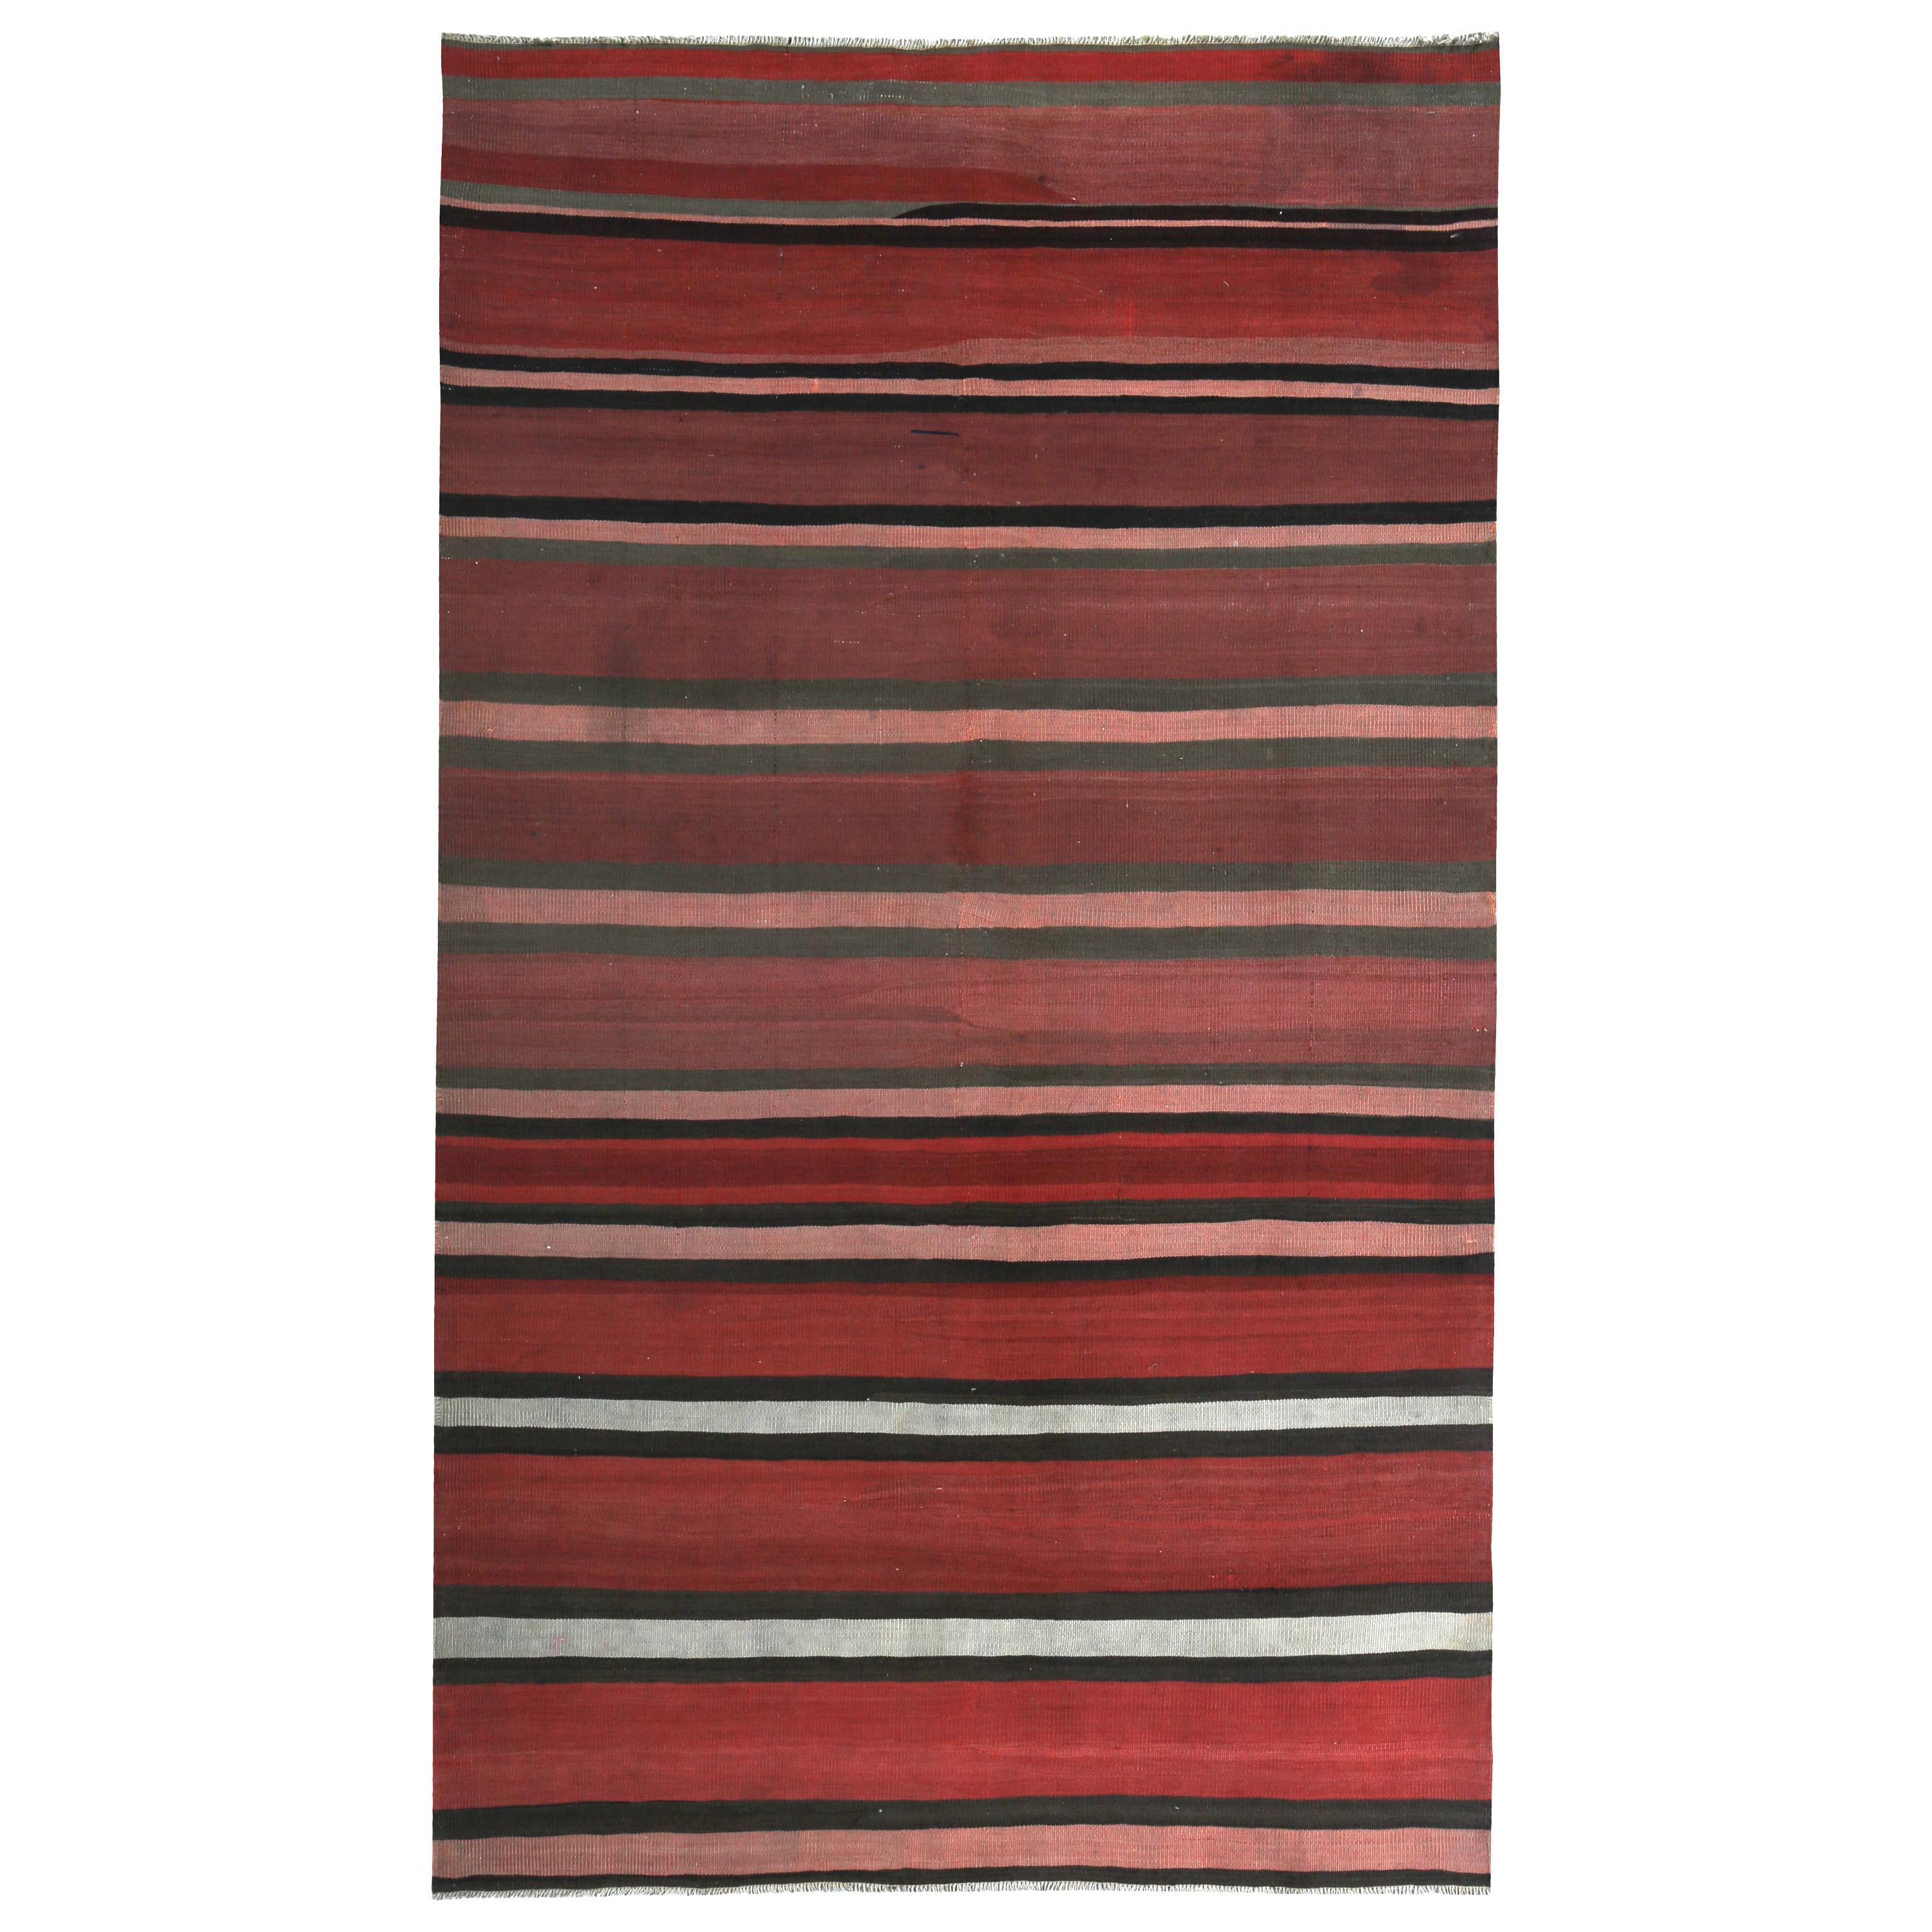 Turkish Kilim Rug In Red White And, Red And White Striped Rug Runner